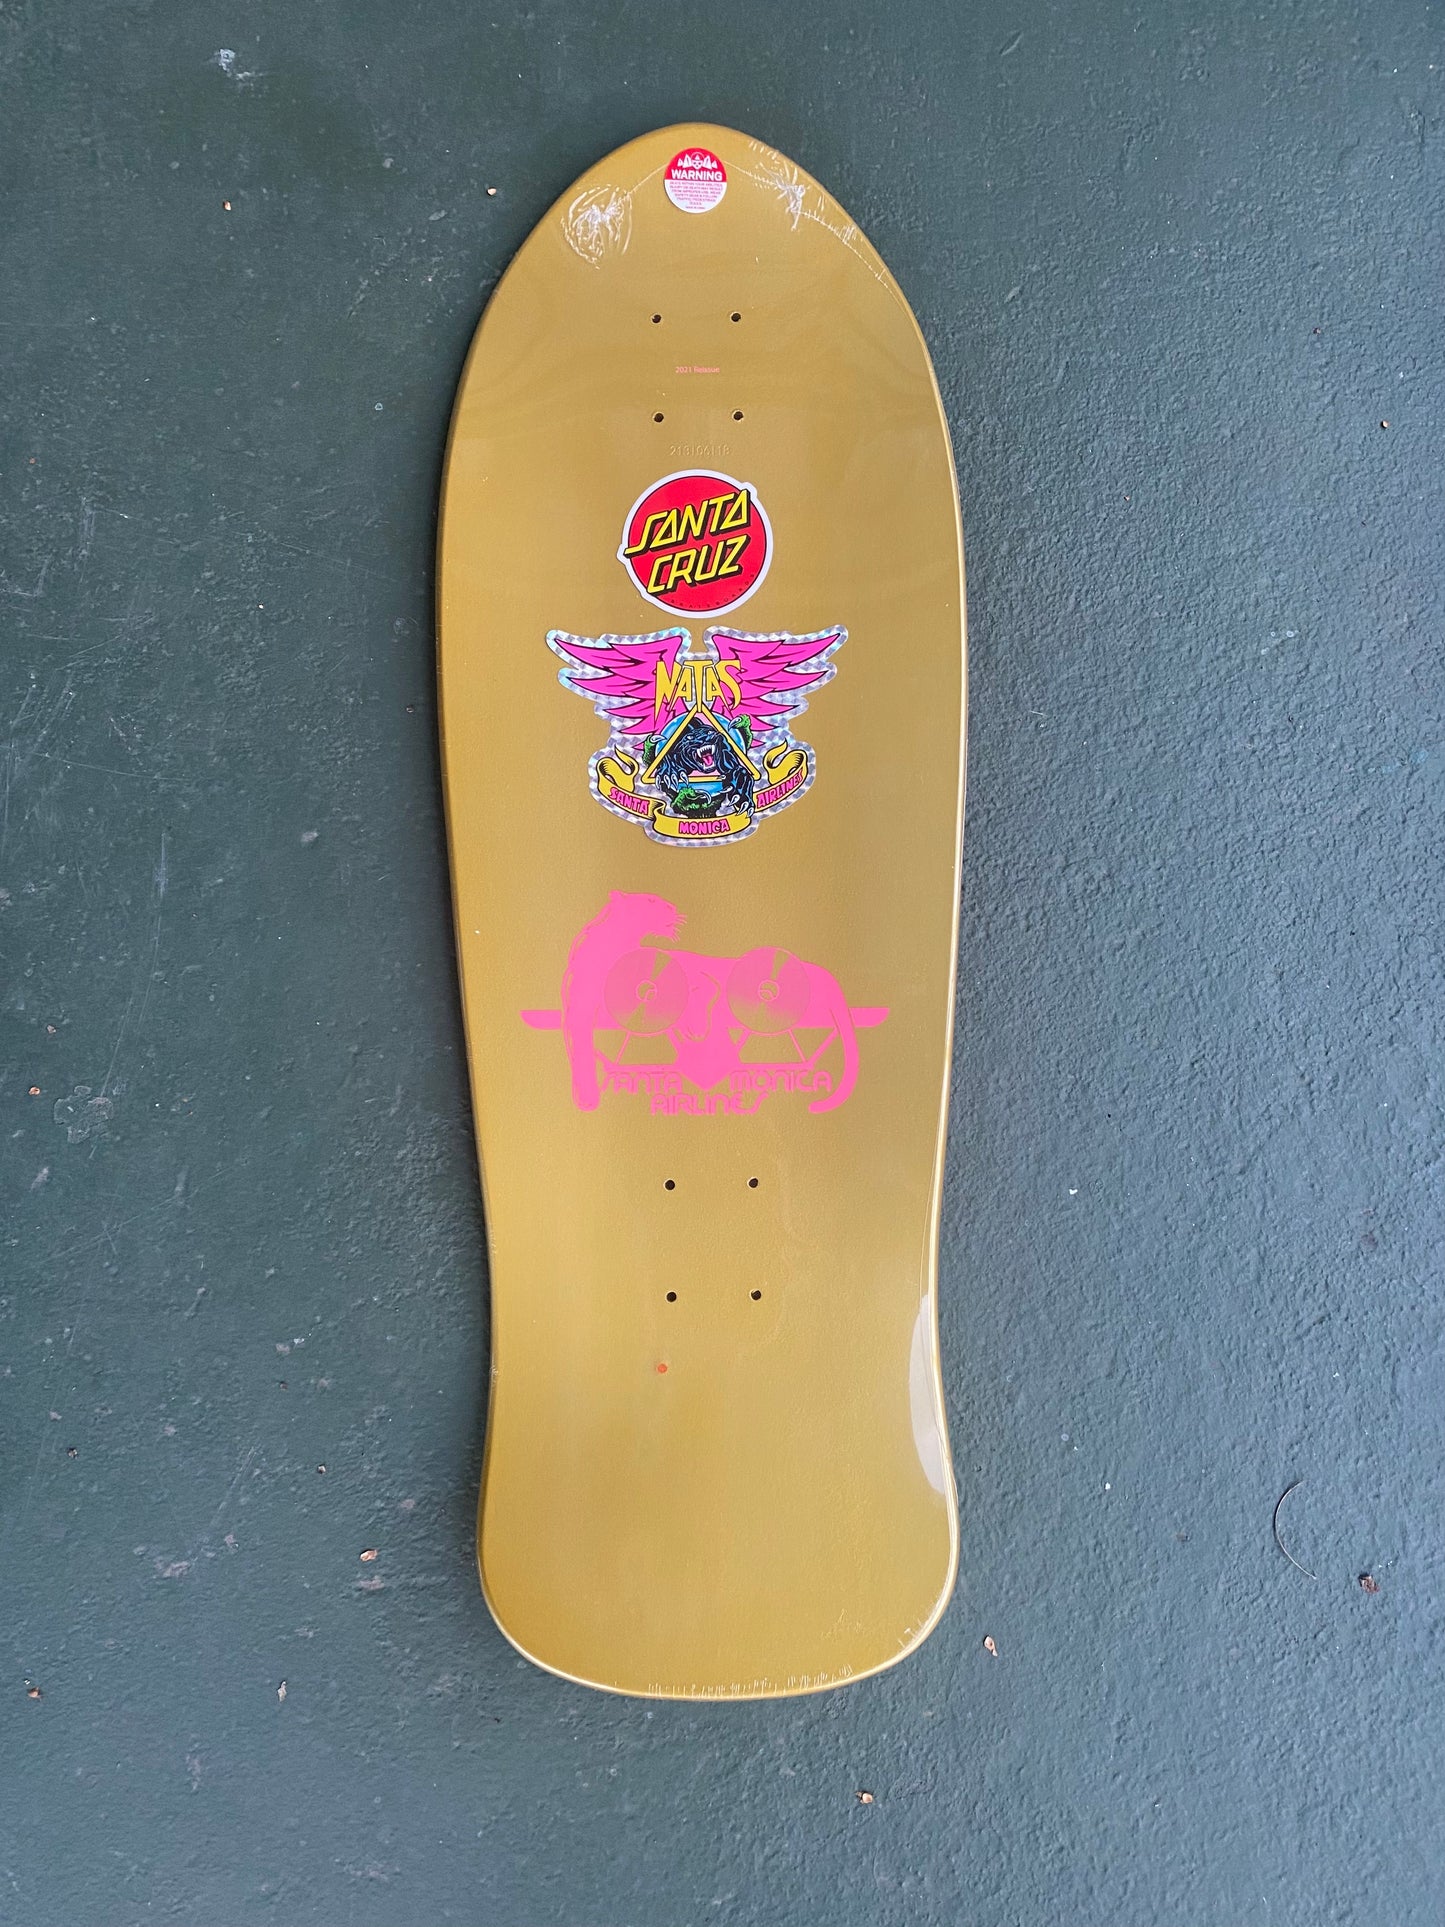 SMA Natas blind bag reissue skateboard deck by Santa Cruz with gold foil panther 3 graphics 10.538in X 30.14in